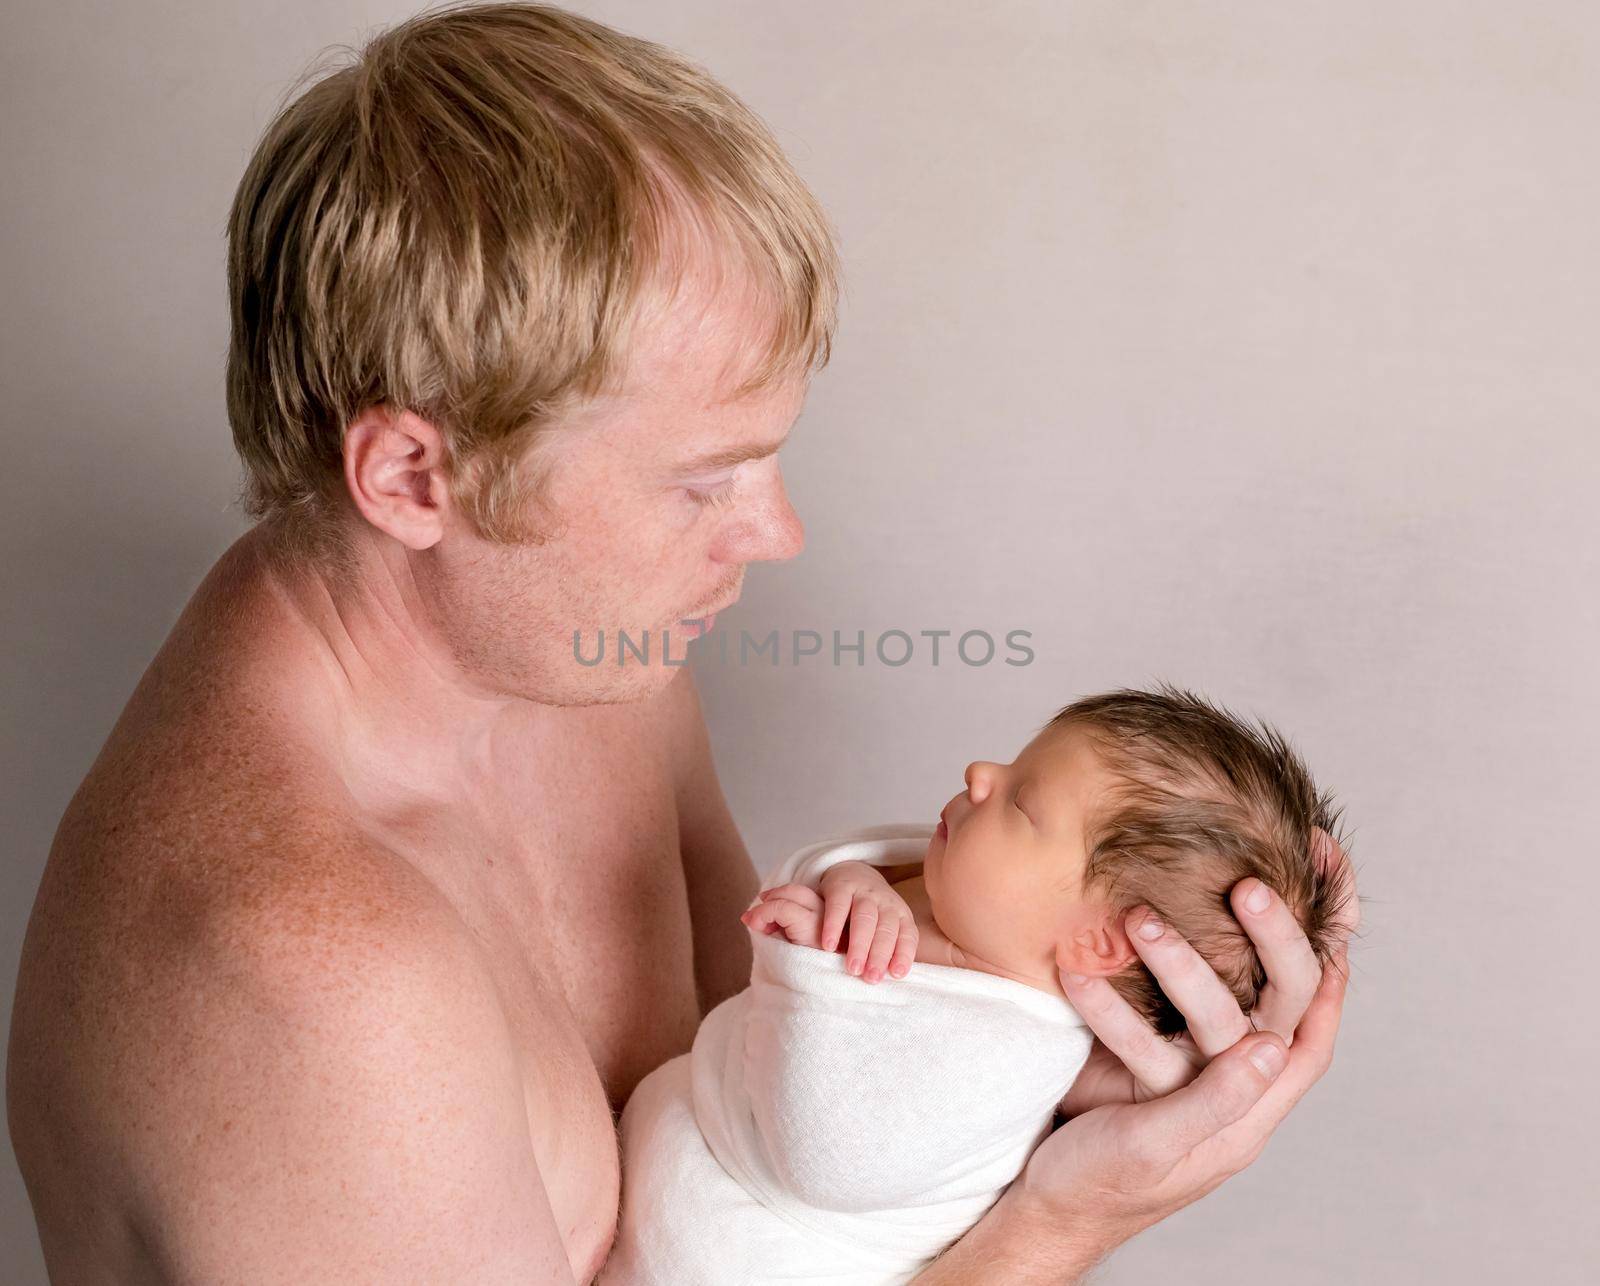 Father holding and looking on little sleeping baby covered in white coverlet on the light background